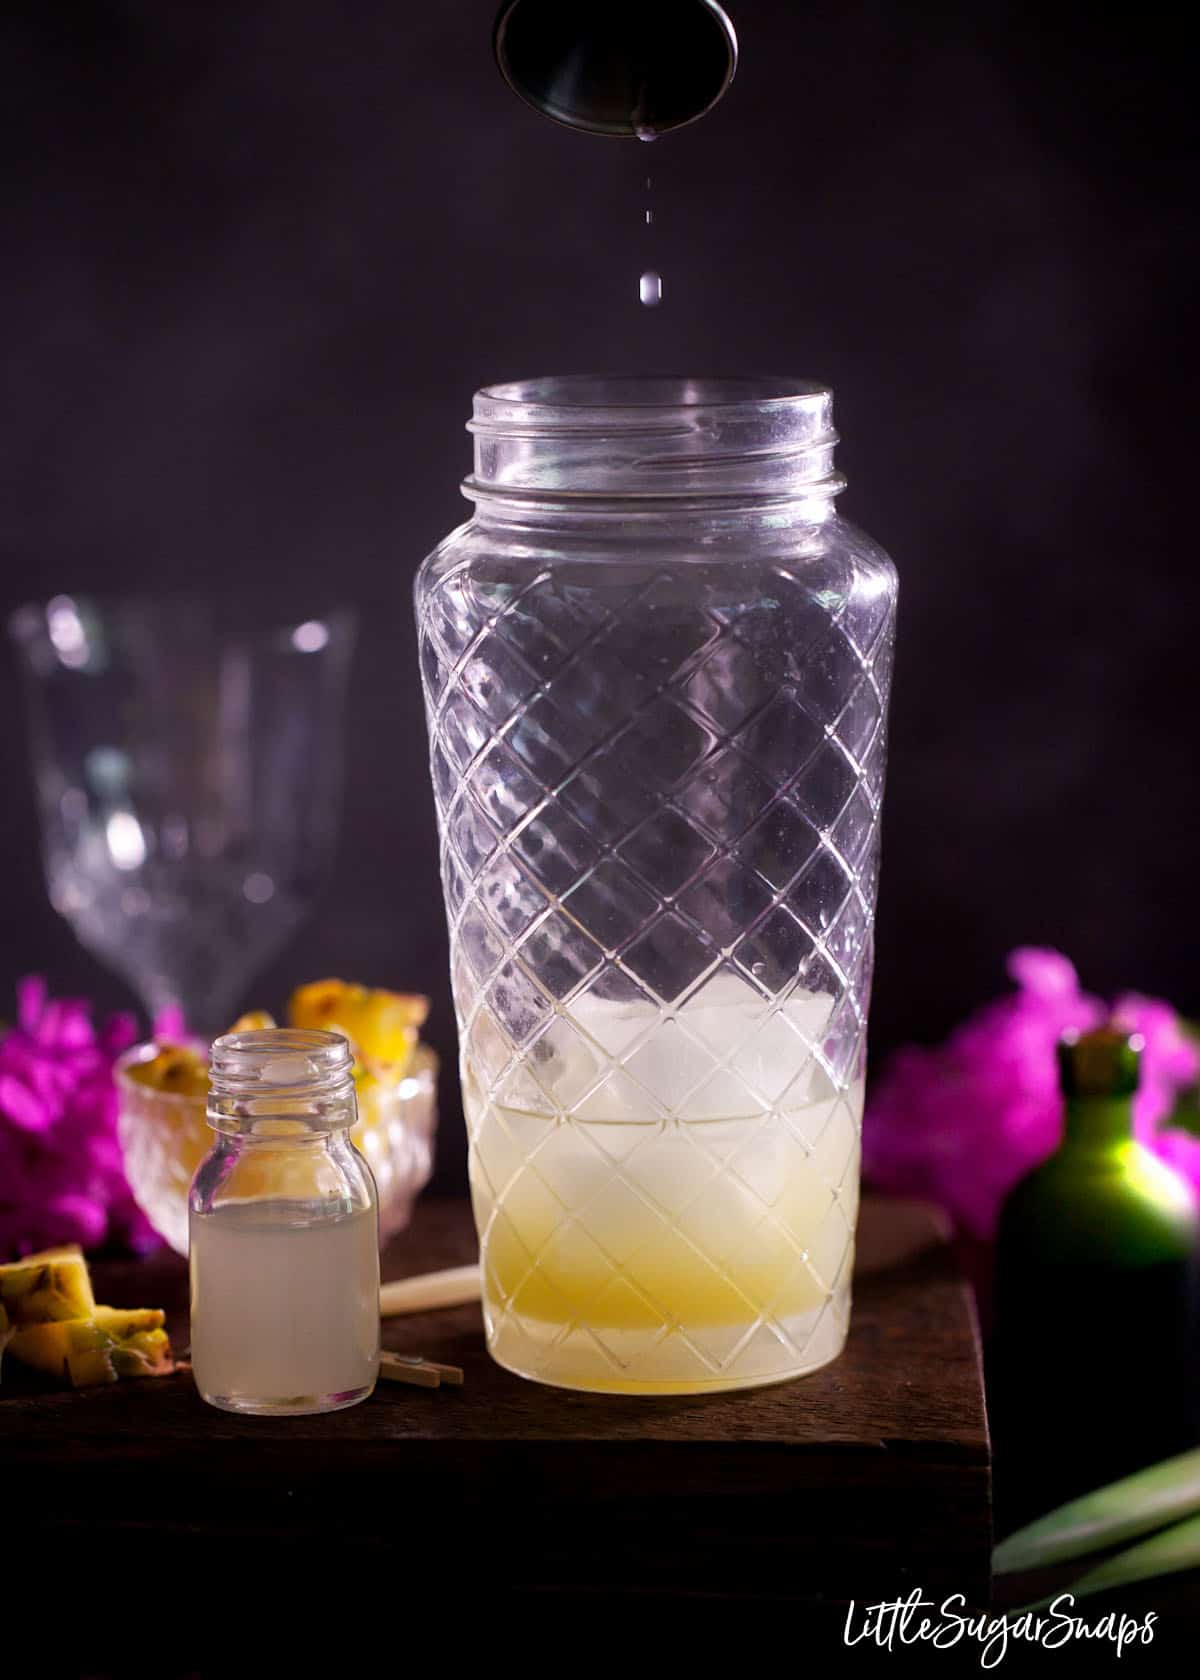 Adding a dash of orgeat syrup to a glass cocktail shaker